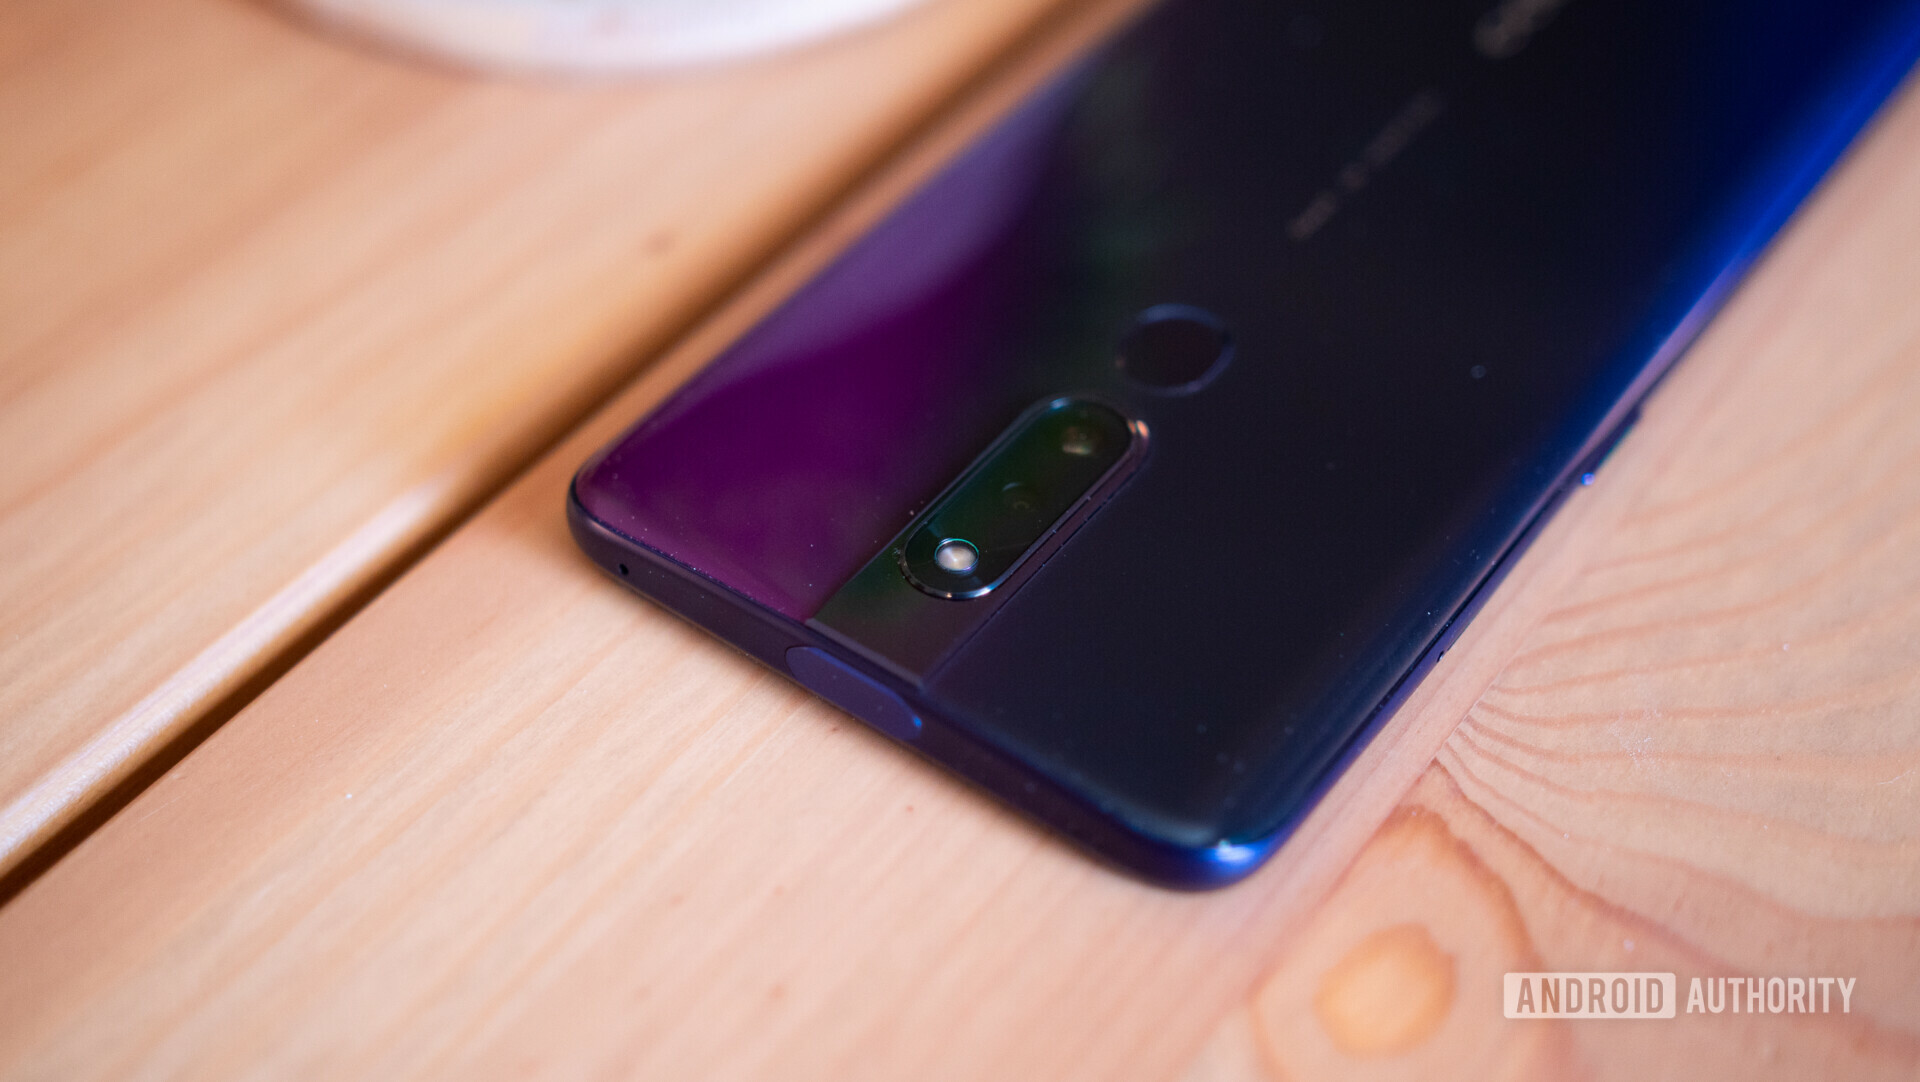 Backside view of the OPPO F11 Pro focusing on the rear cameras.